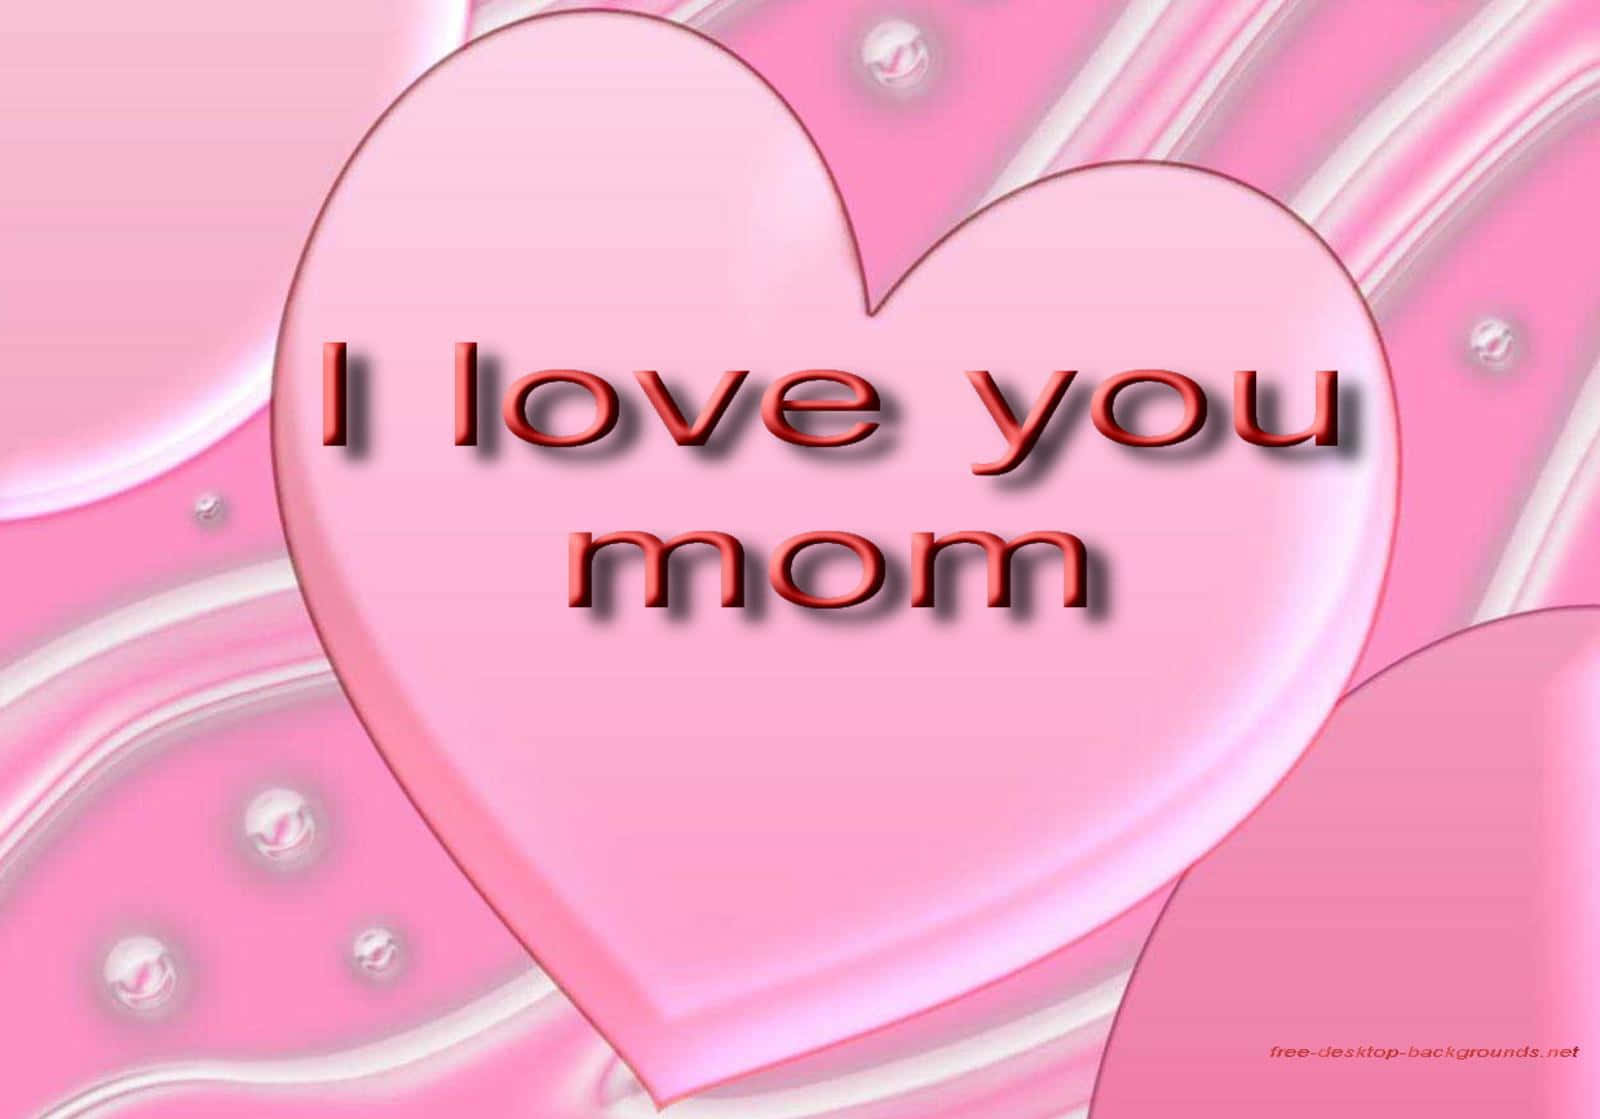 Free Your Mom Wallpaper Downloads, [100+] Your Mom Wallpapers for FREE |  